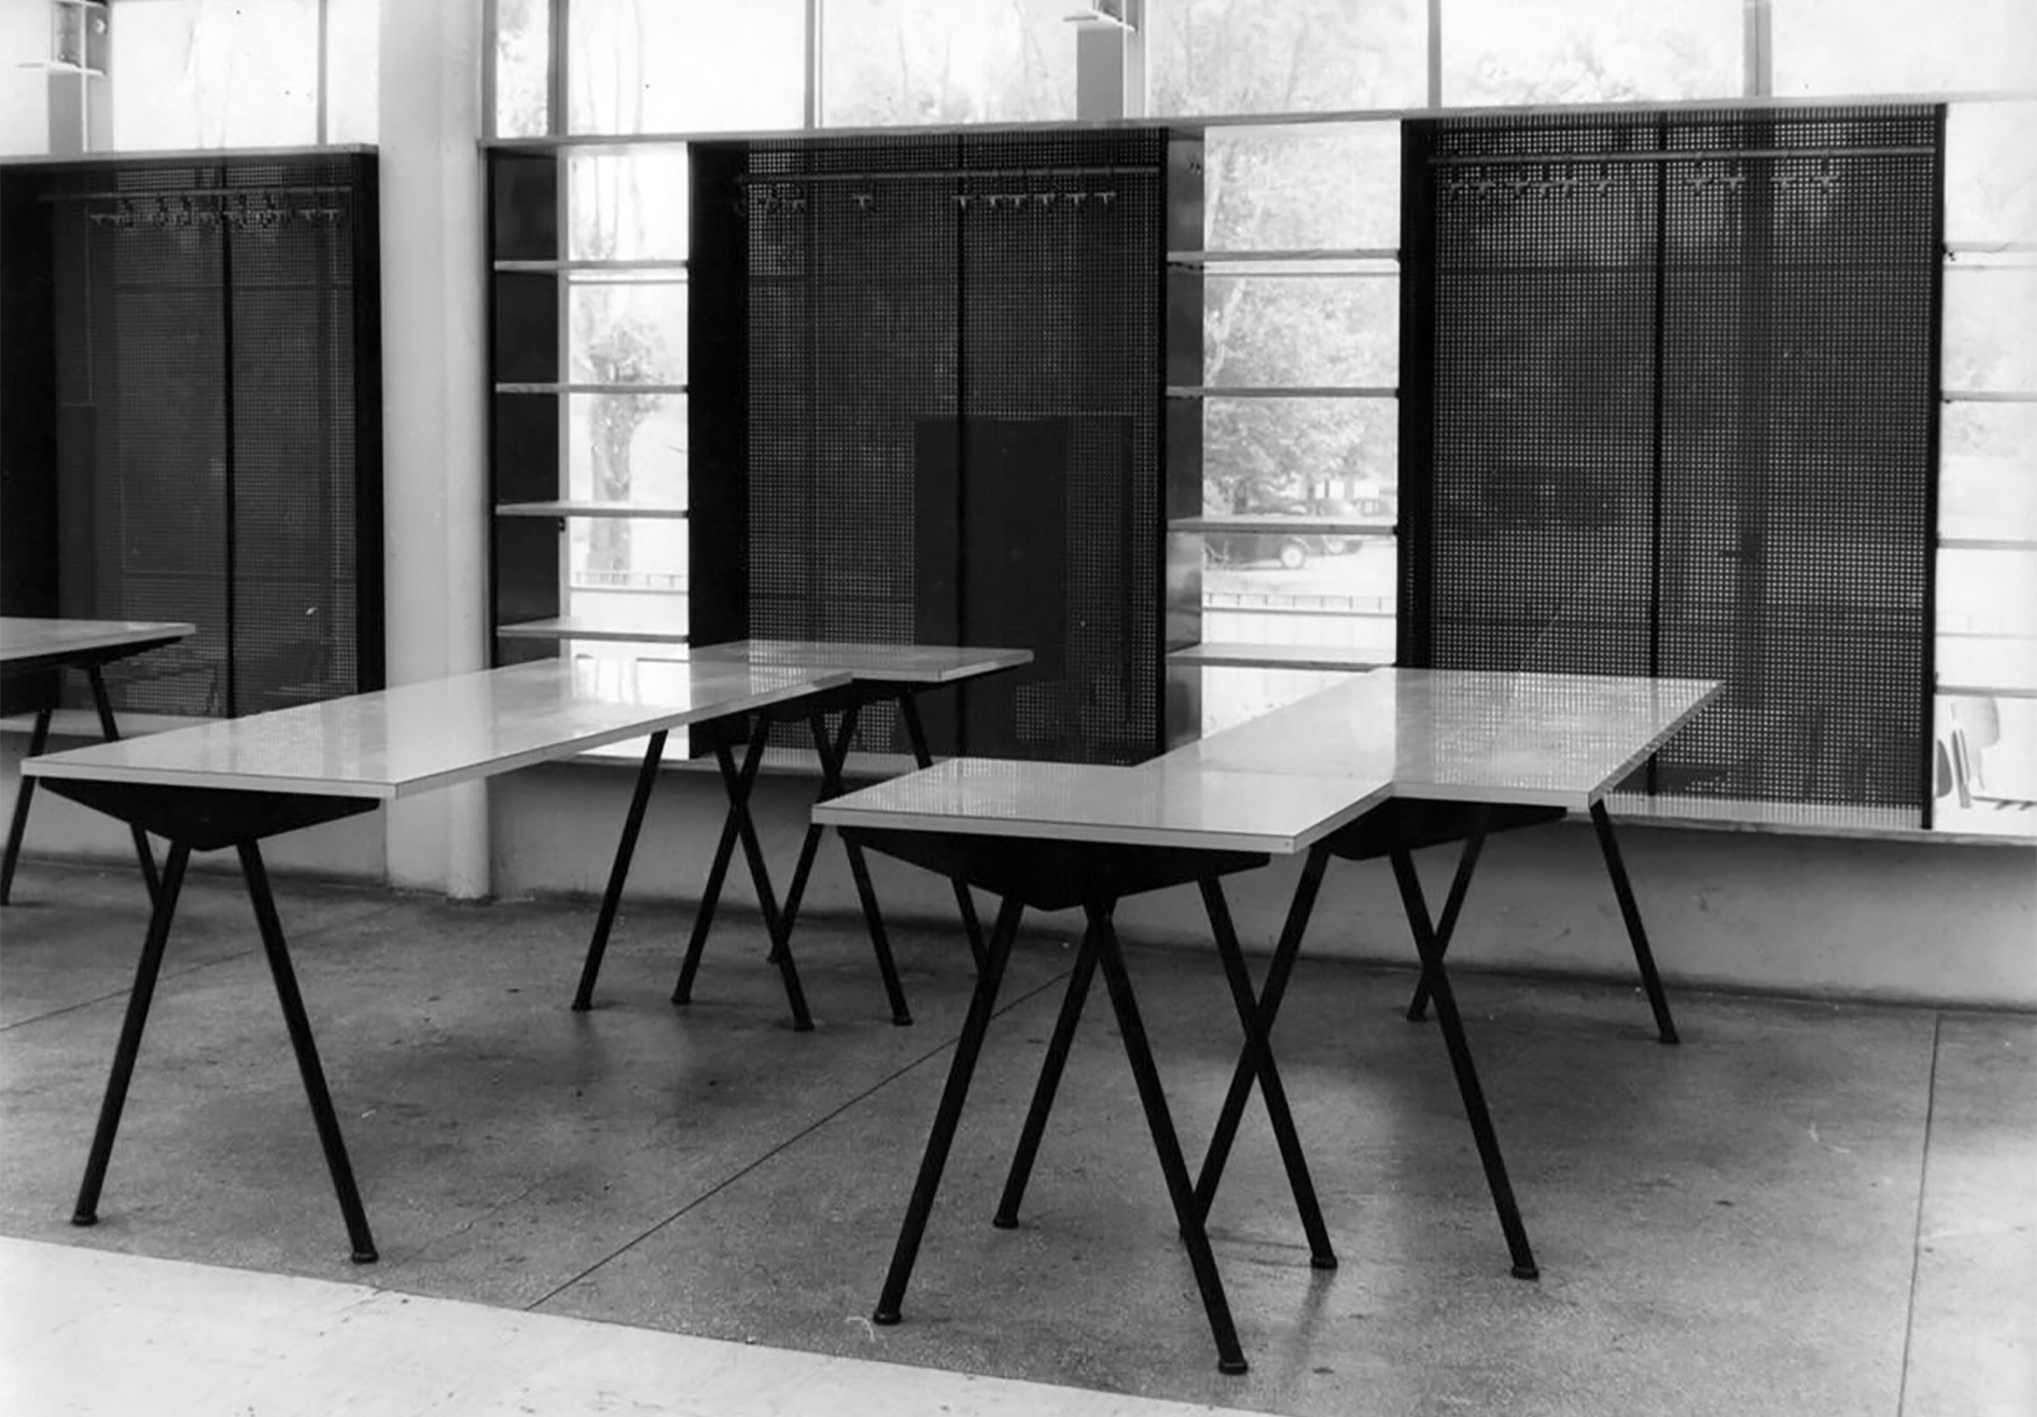 Cité Universitaire, Antony (architects E. Beaudouin and P. Fournier, 1951–1957). The university restaurant fitted out with Compas tables, ca. 1956.